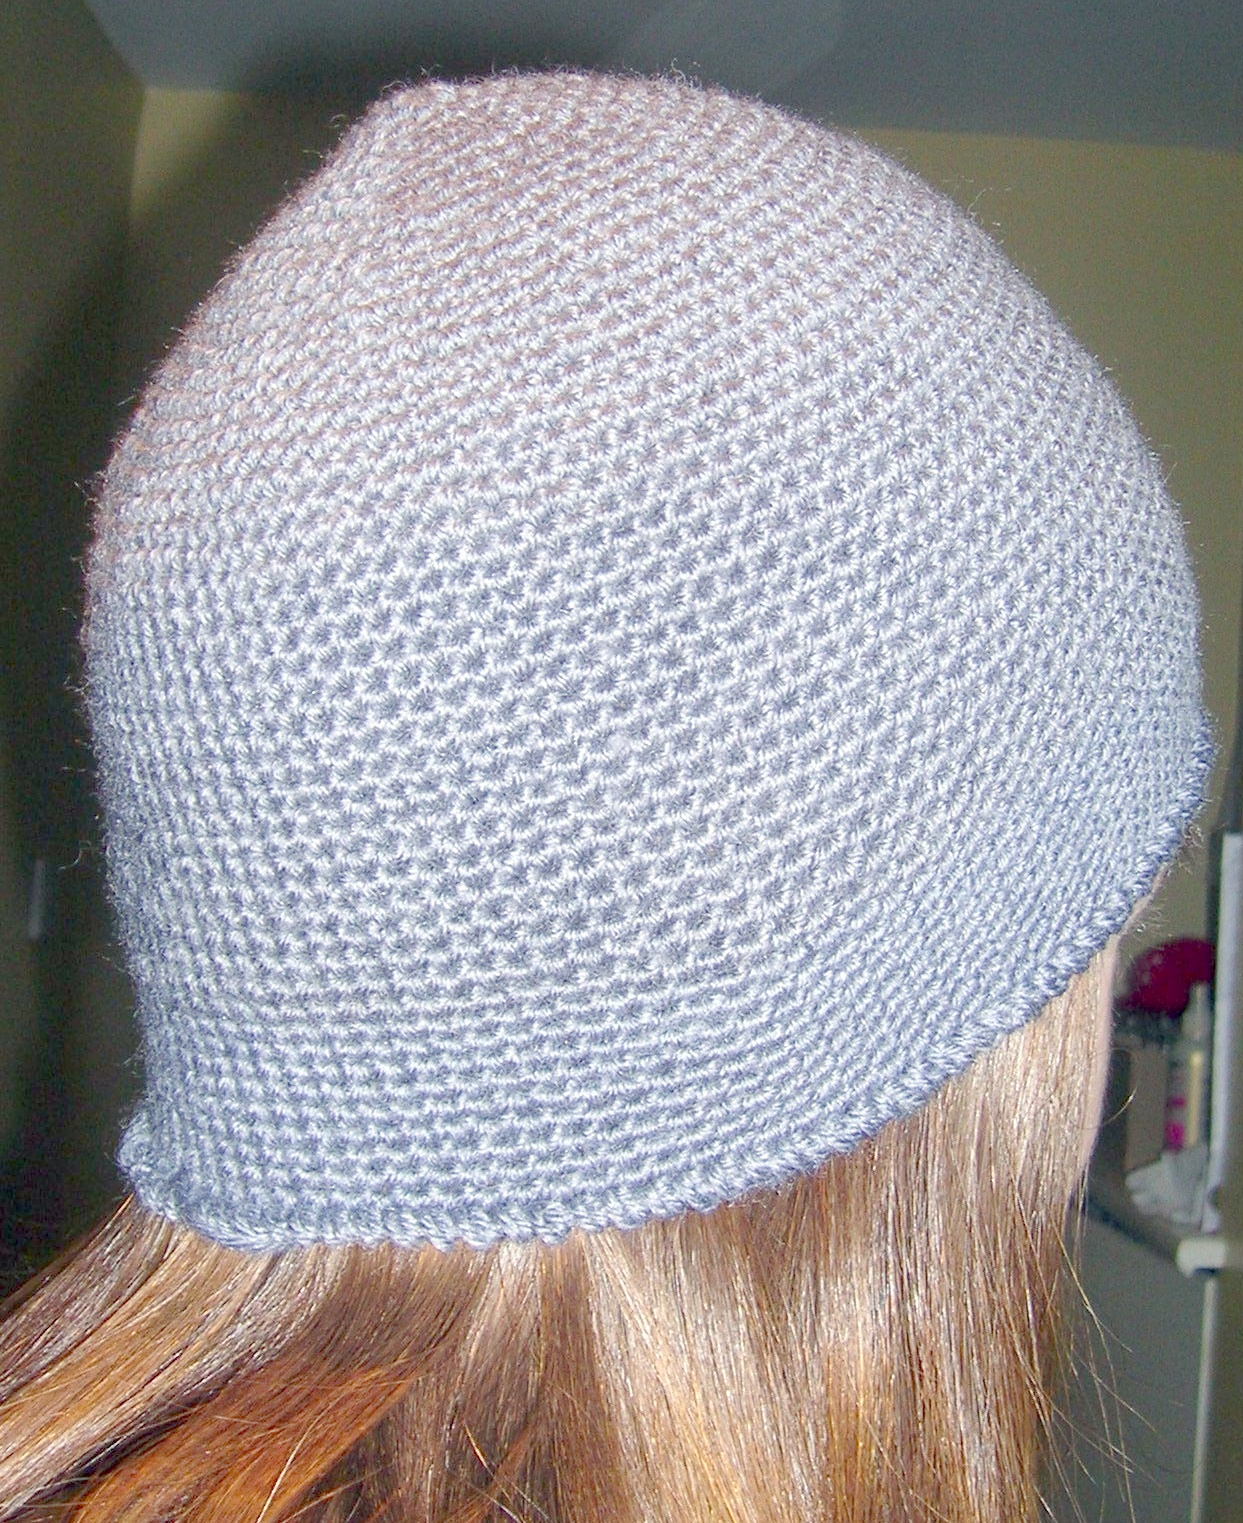 Single Crochet Hat Pattern Increasing Crochet In The Round For Rugs Hats And Other Lovely